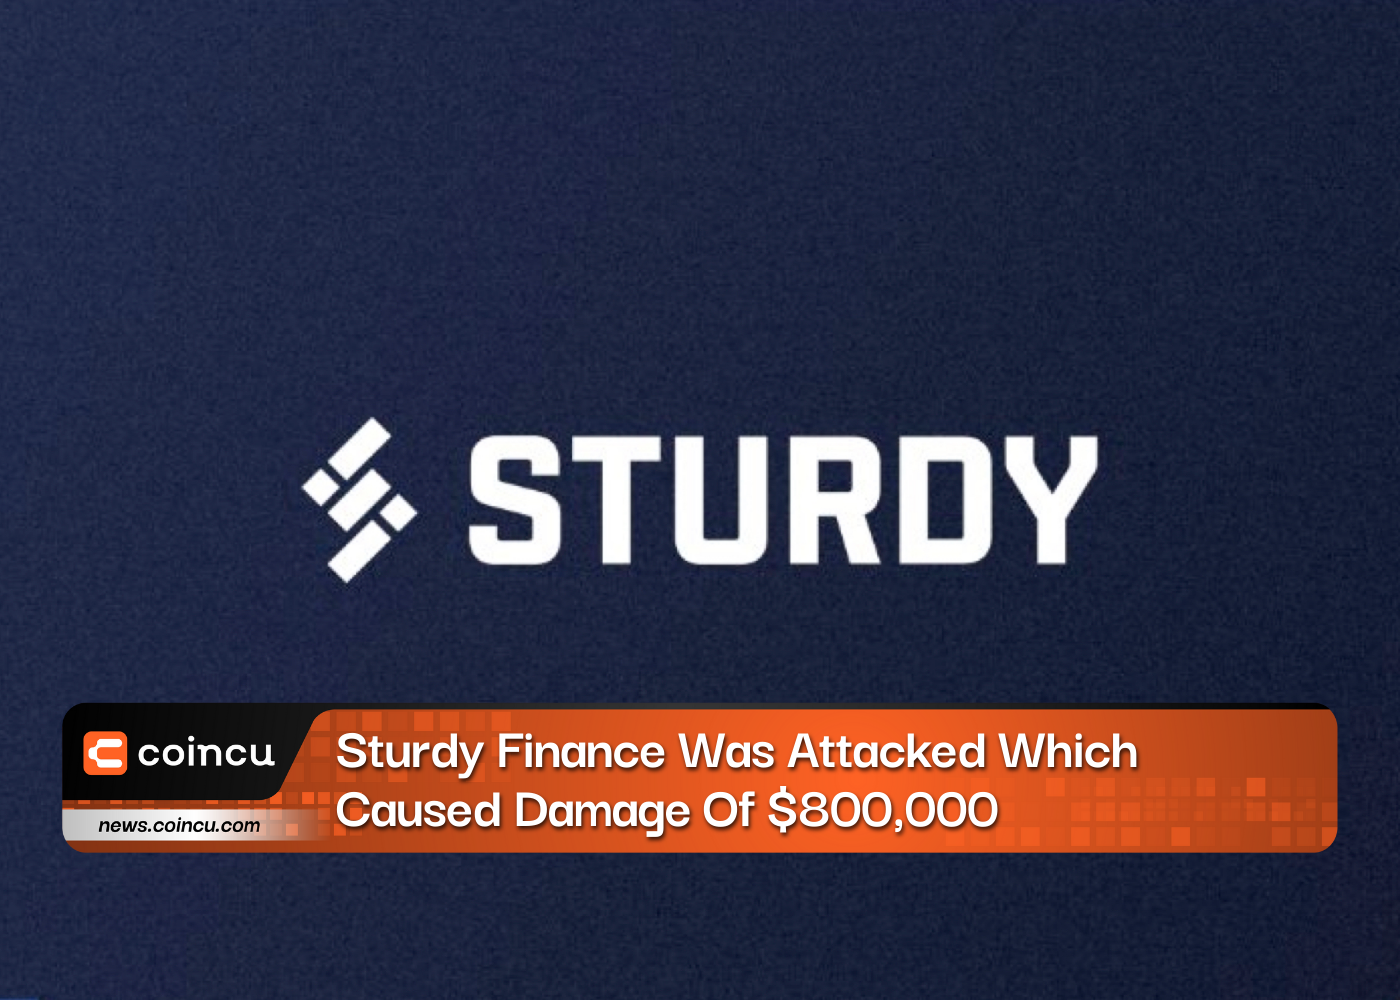 Sturdy Finance Was Attacked Which Caused Damage Of $800,000